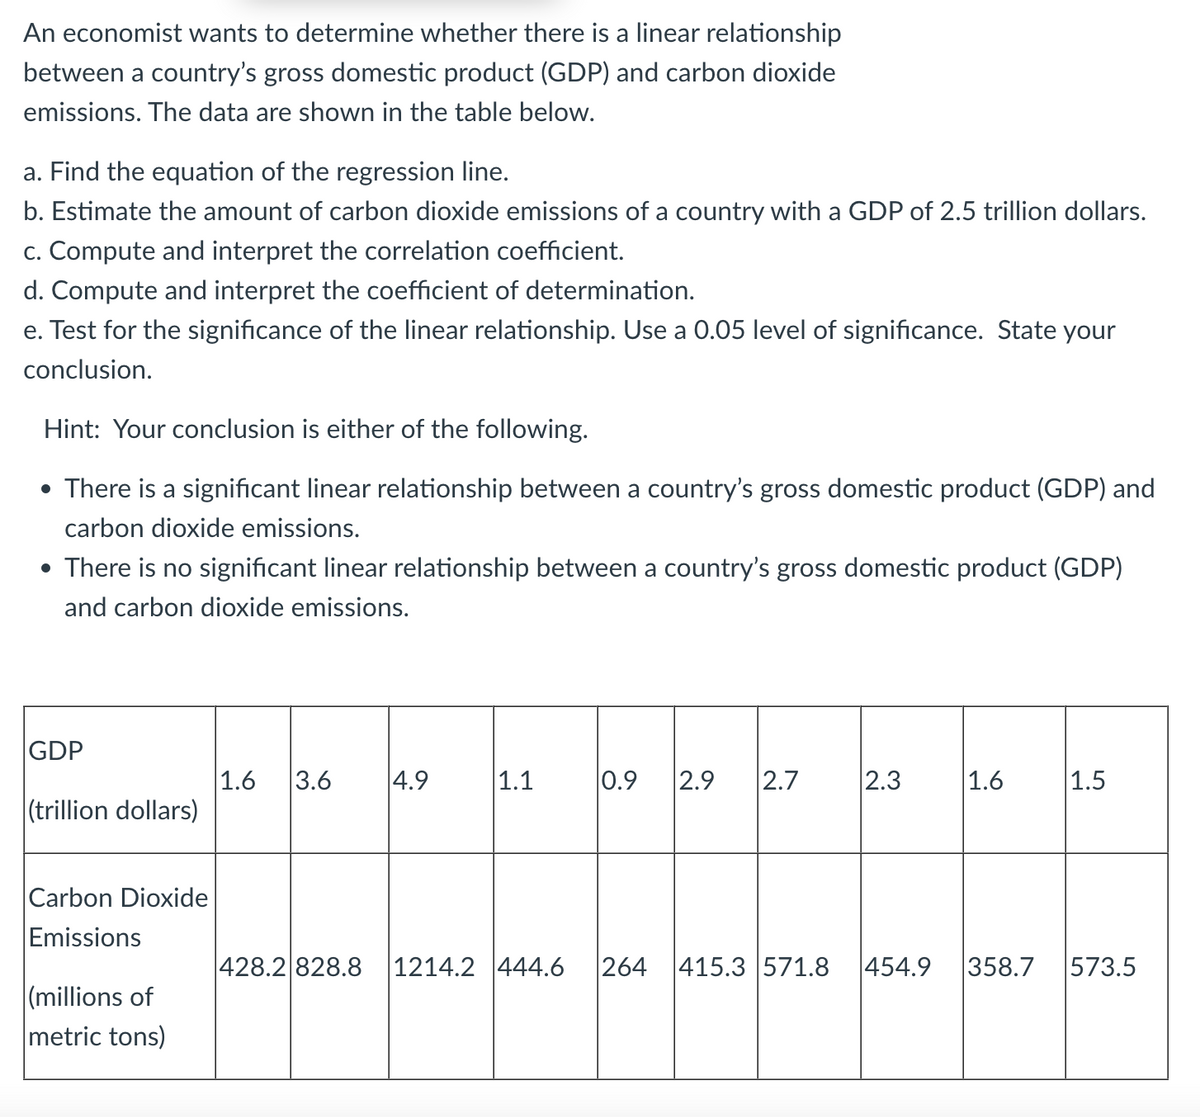 An economist wants to determine whether there is a linear relationship
between a country's gross domestic product (GDP) and carbon dioxide
emissions. The data are shown in the table below.
a. Find the equation of the regression line.
b. Estimate the amount of carbon dioxide emissions of a country with a GDP of 2.5 trillion dollars.
c. Compute and interpret the correlation coefficient.
d. Compute and interpret the coefficient of determination.
e. Test for the significance of the linear relationship. Use a 0.05 level of significance. State your
conclusion.
Hint: Your conclusion is either of the following.
• There is a significant linear relationship between a country's gross domestic product (GDP) and
carbon dioxide emissions.
• There is no significant linear relationship between a country's gross domestic product (GDP)
and carbon dioxide emissions.
GDP
1.6 3.6
4.9
1.1
0.9 2.9 2.7
2.3
1.6
1.5
(trillion dollars)
Carbon Dioxide
Emissions
428.2 828.8 1214.2 444.6 264 415.3 571.8 454.9 358.7 573.5
(millions of
metric tons)